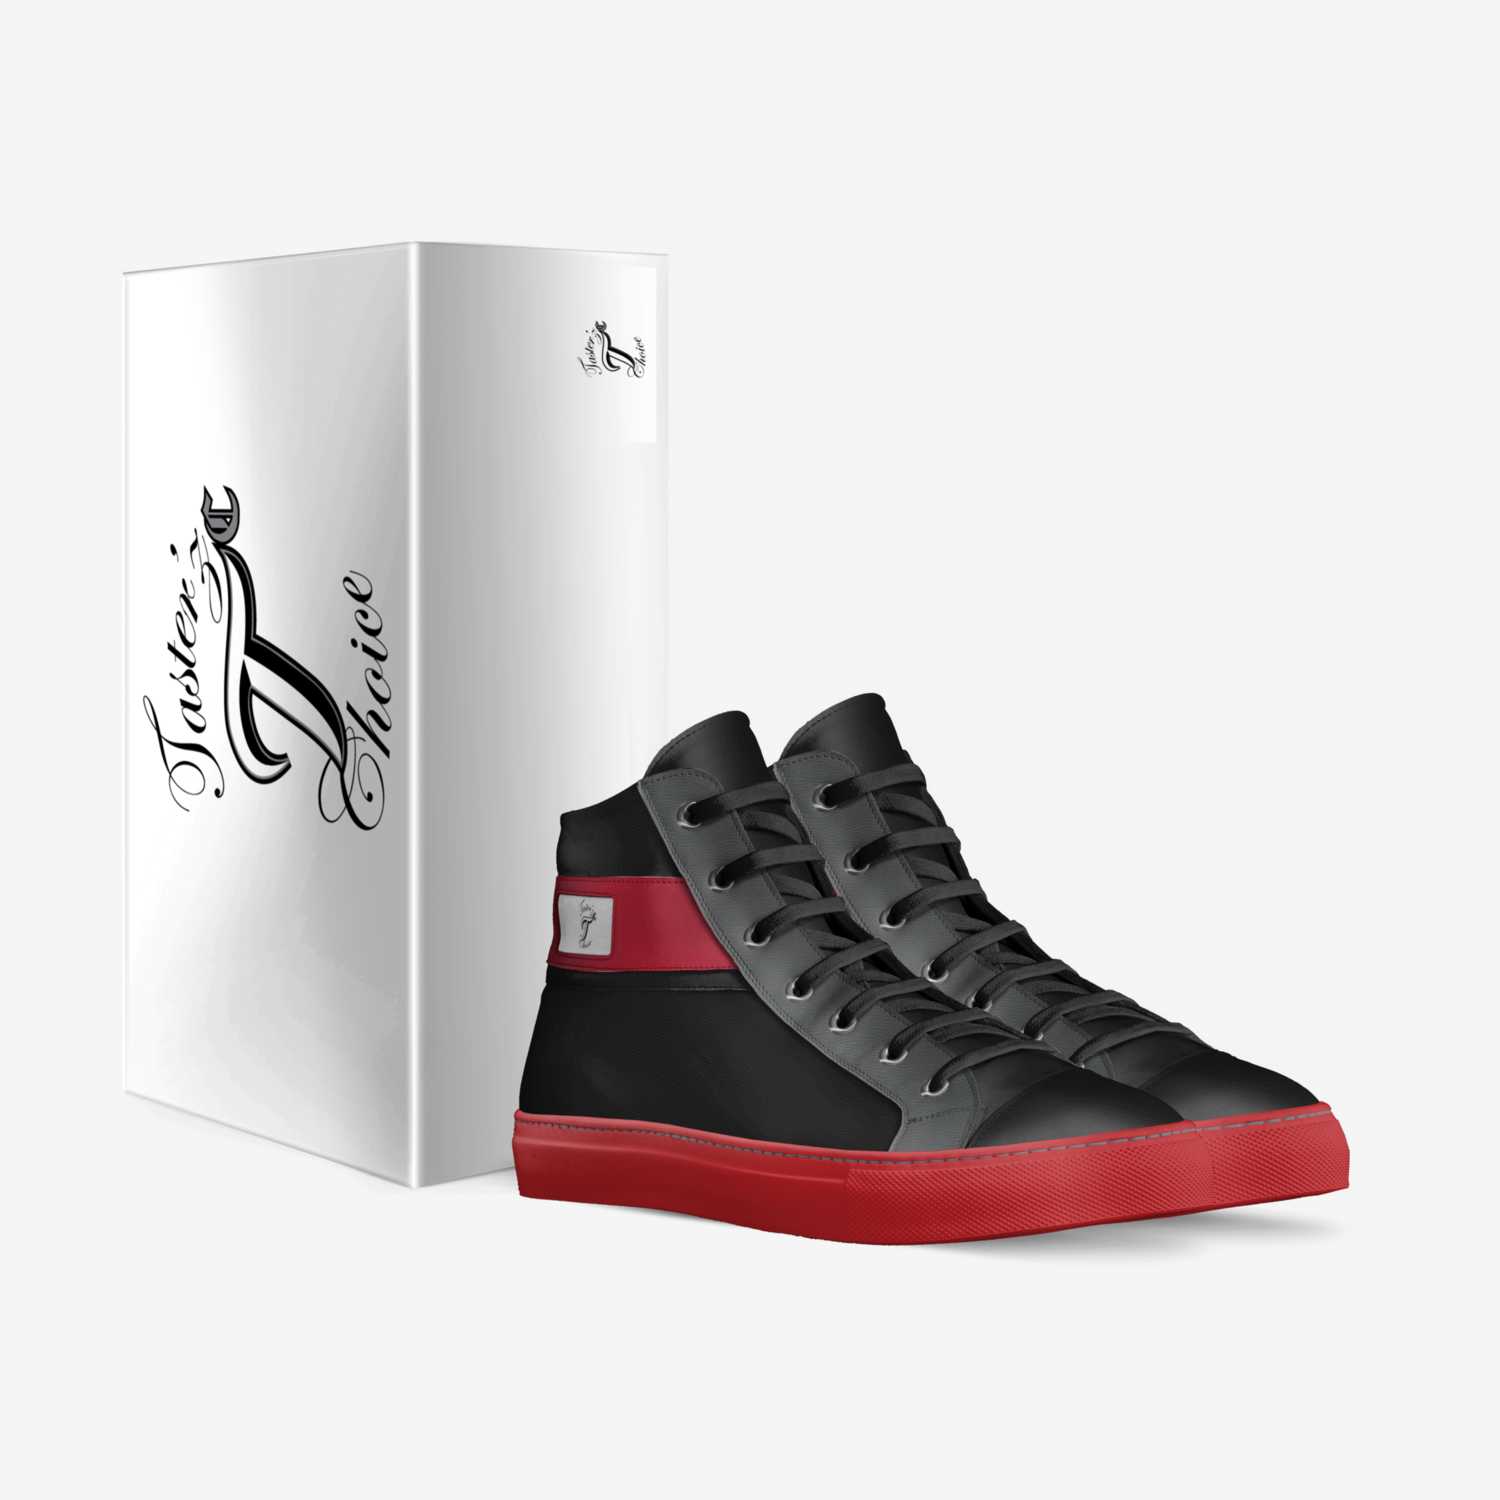 Ascension custom made in Italy shoes by Tim Collins | Box view